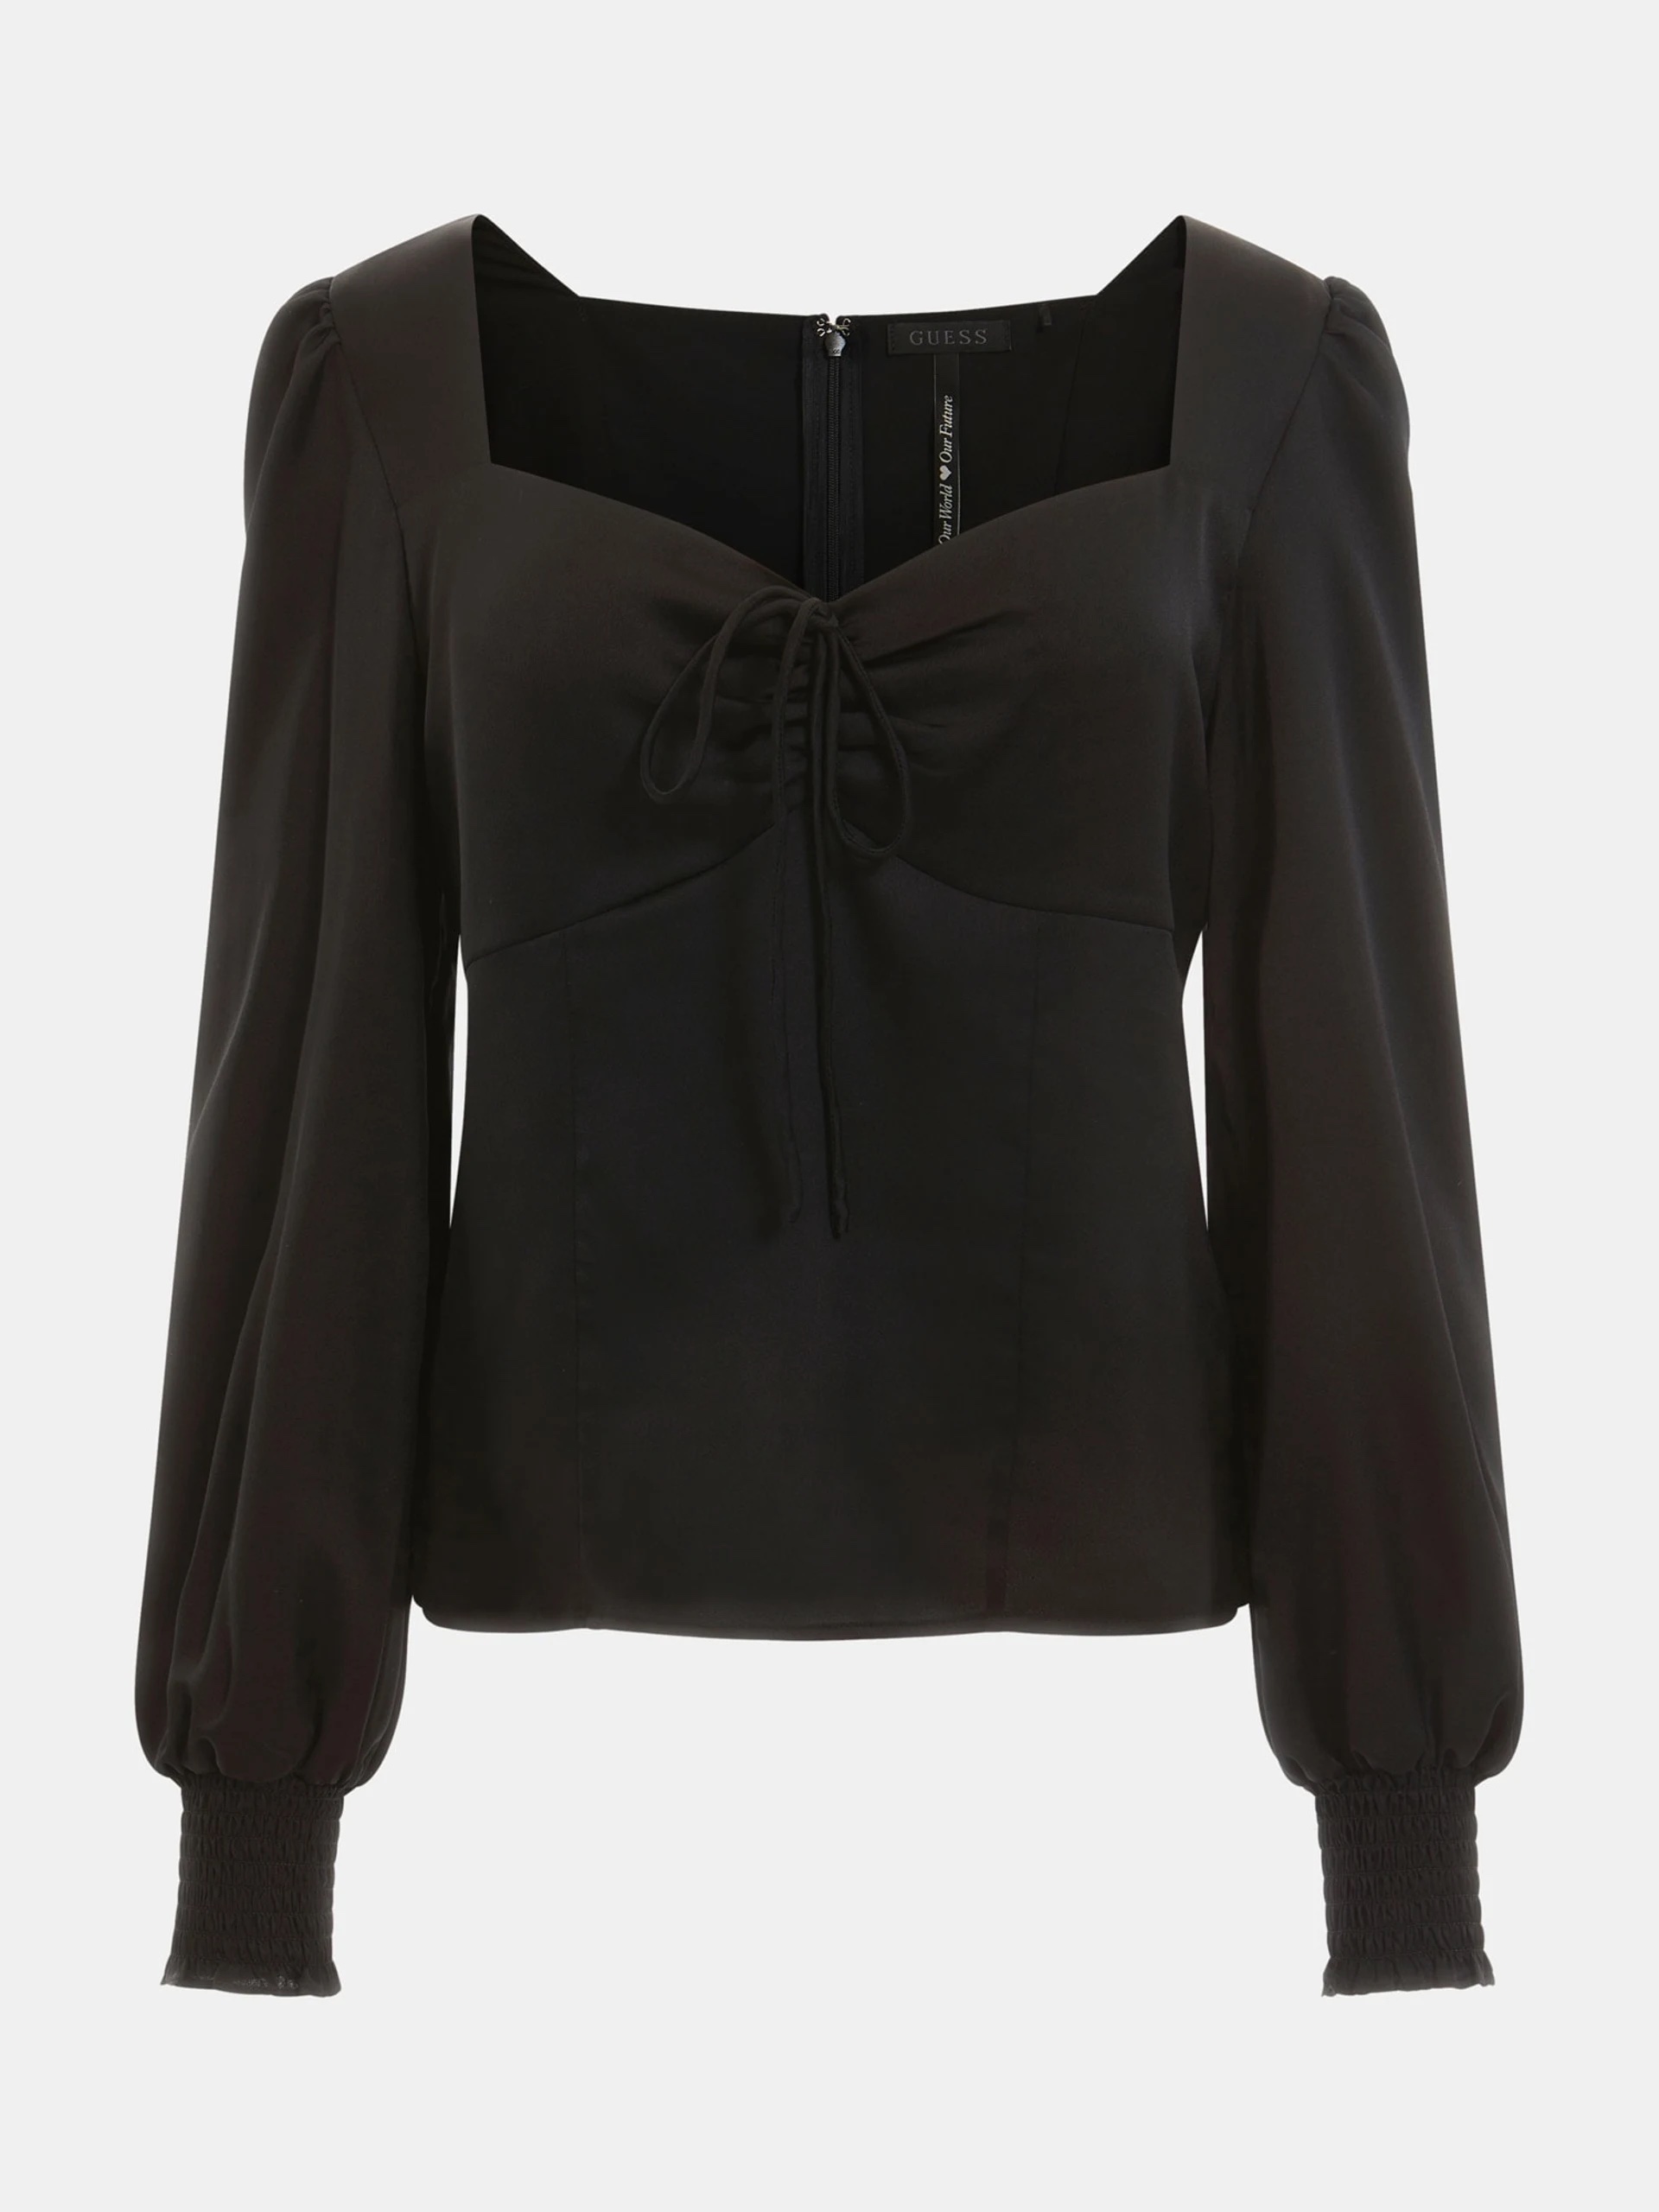 Guess A999 Long Sleeves Jet Black Adelaide Blouse